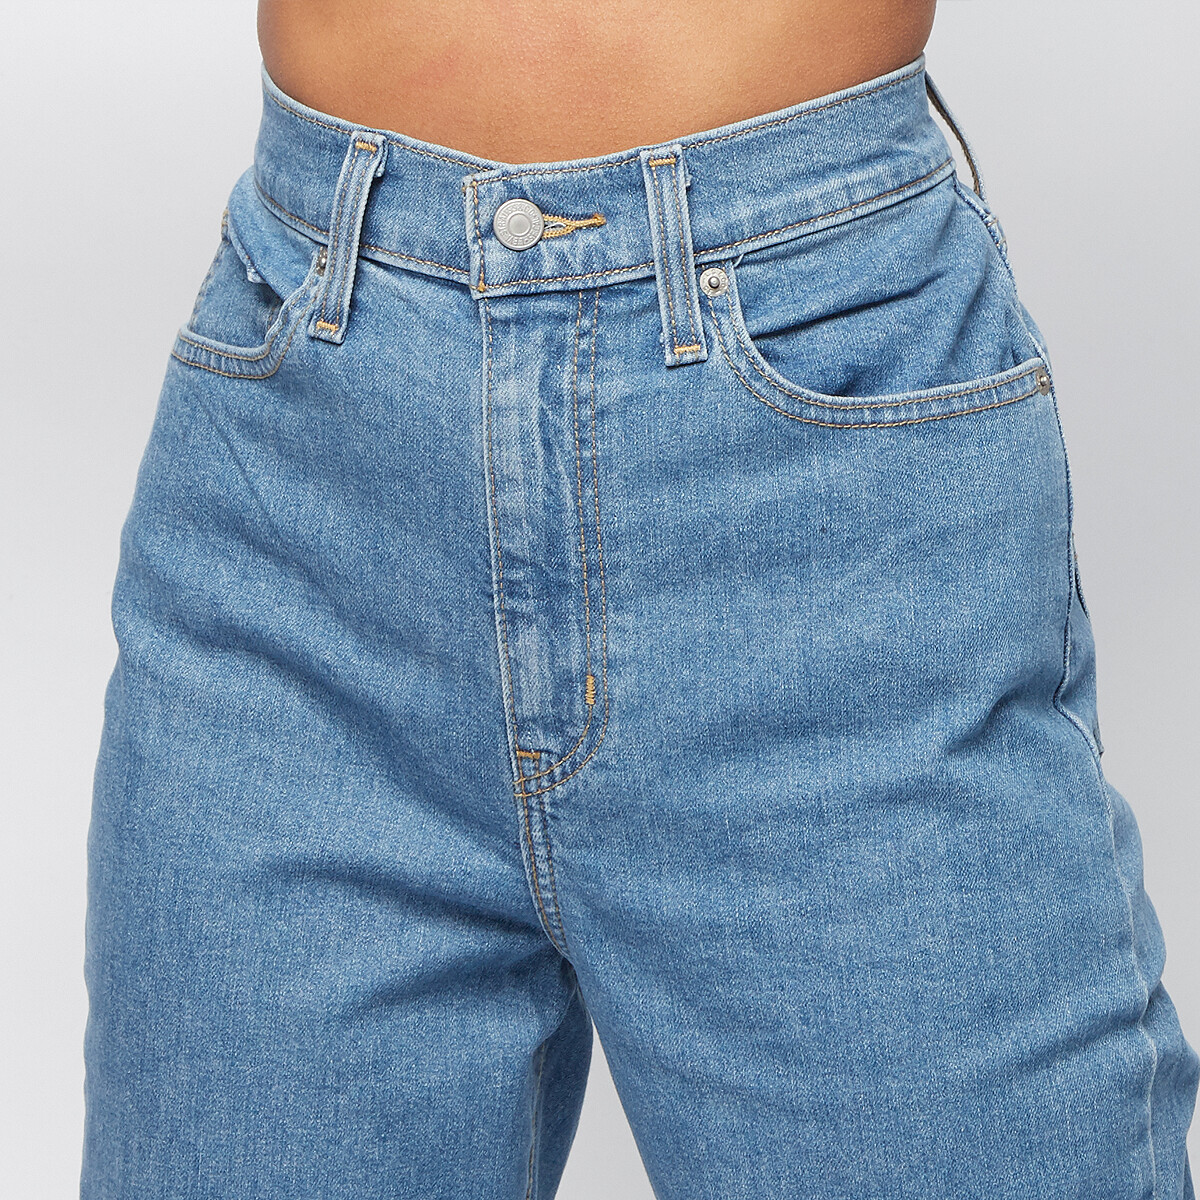 Buy Levi's High-waisted Mom Jeans indigo from £70.00 (Today) – Best Deals on